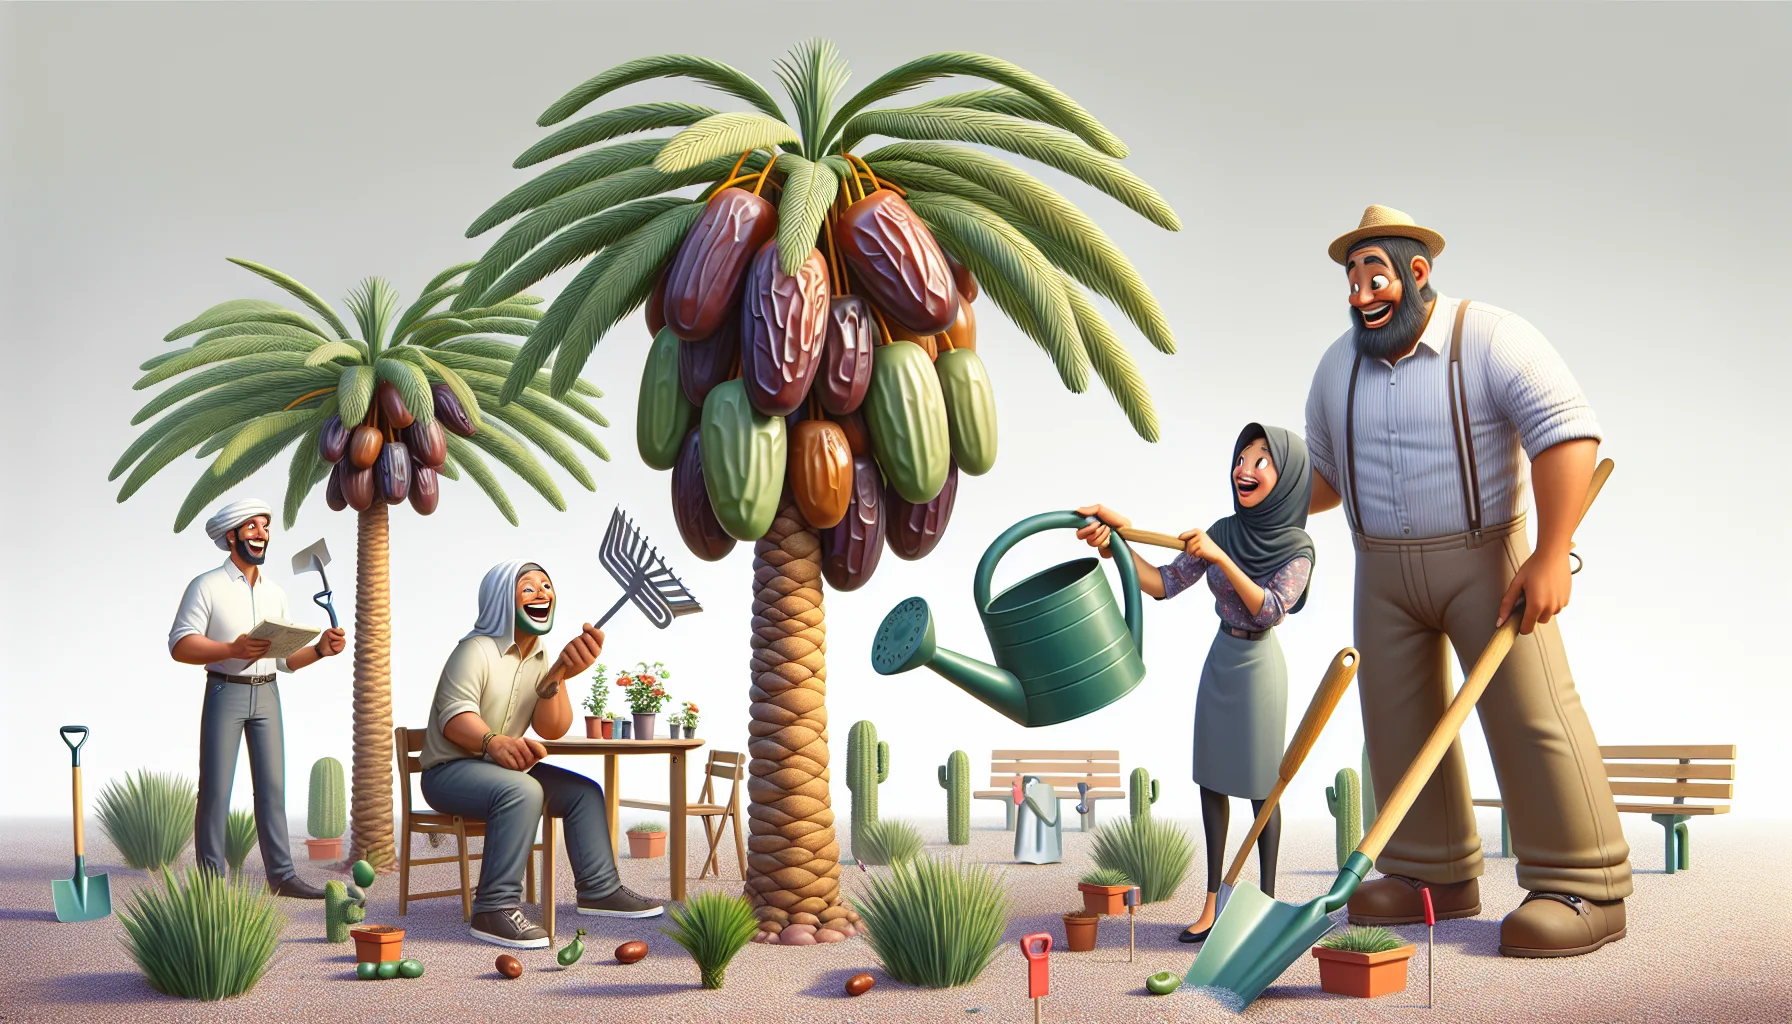 Create a whimsical, yet realistic scene that portrays date palm trees in a humorous garden setting. Visualize an adult male Hispanic landscaper in the process of giving water to date palm trees using an oversized watering can, while a mature, Black female gardener laughs nearby, holding a gargantuan garden trowel. She is having a friendly conversation with a tall, Middle Eastern male observer, who is surprisingly agape at the sight of a tree producing oversized dates. Amidst all these, have a young South Asian girl and a Caucasian boy observing joyfully, holding little gardening tools, thus inspiring people to take pleasure in gardening.